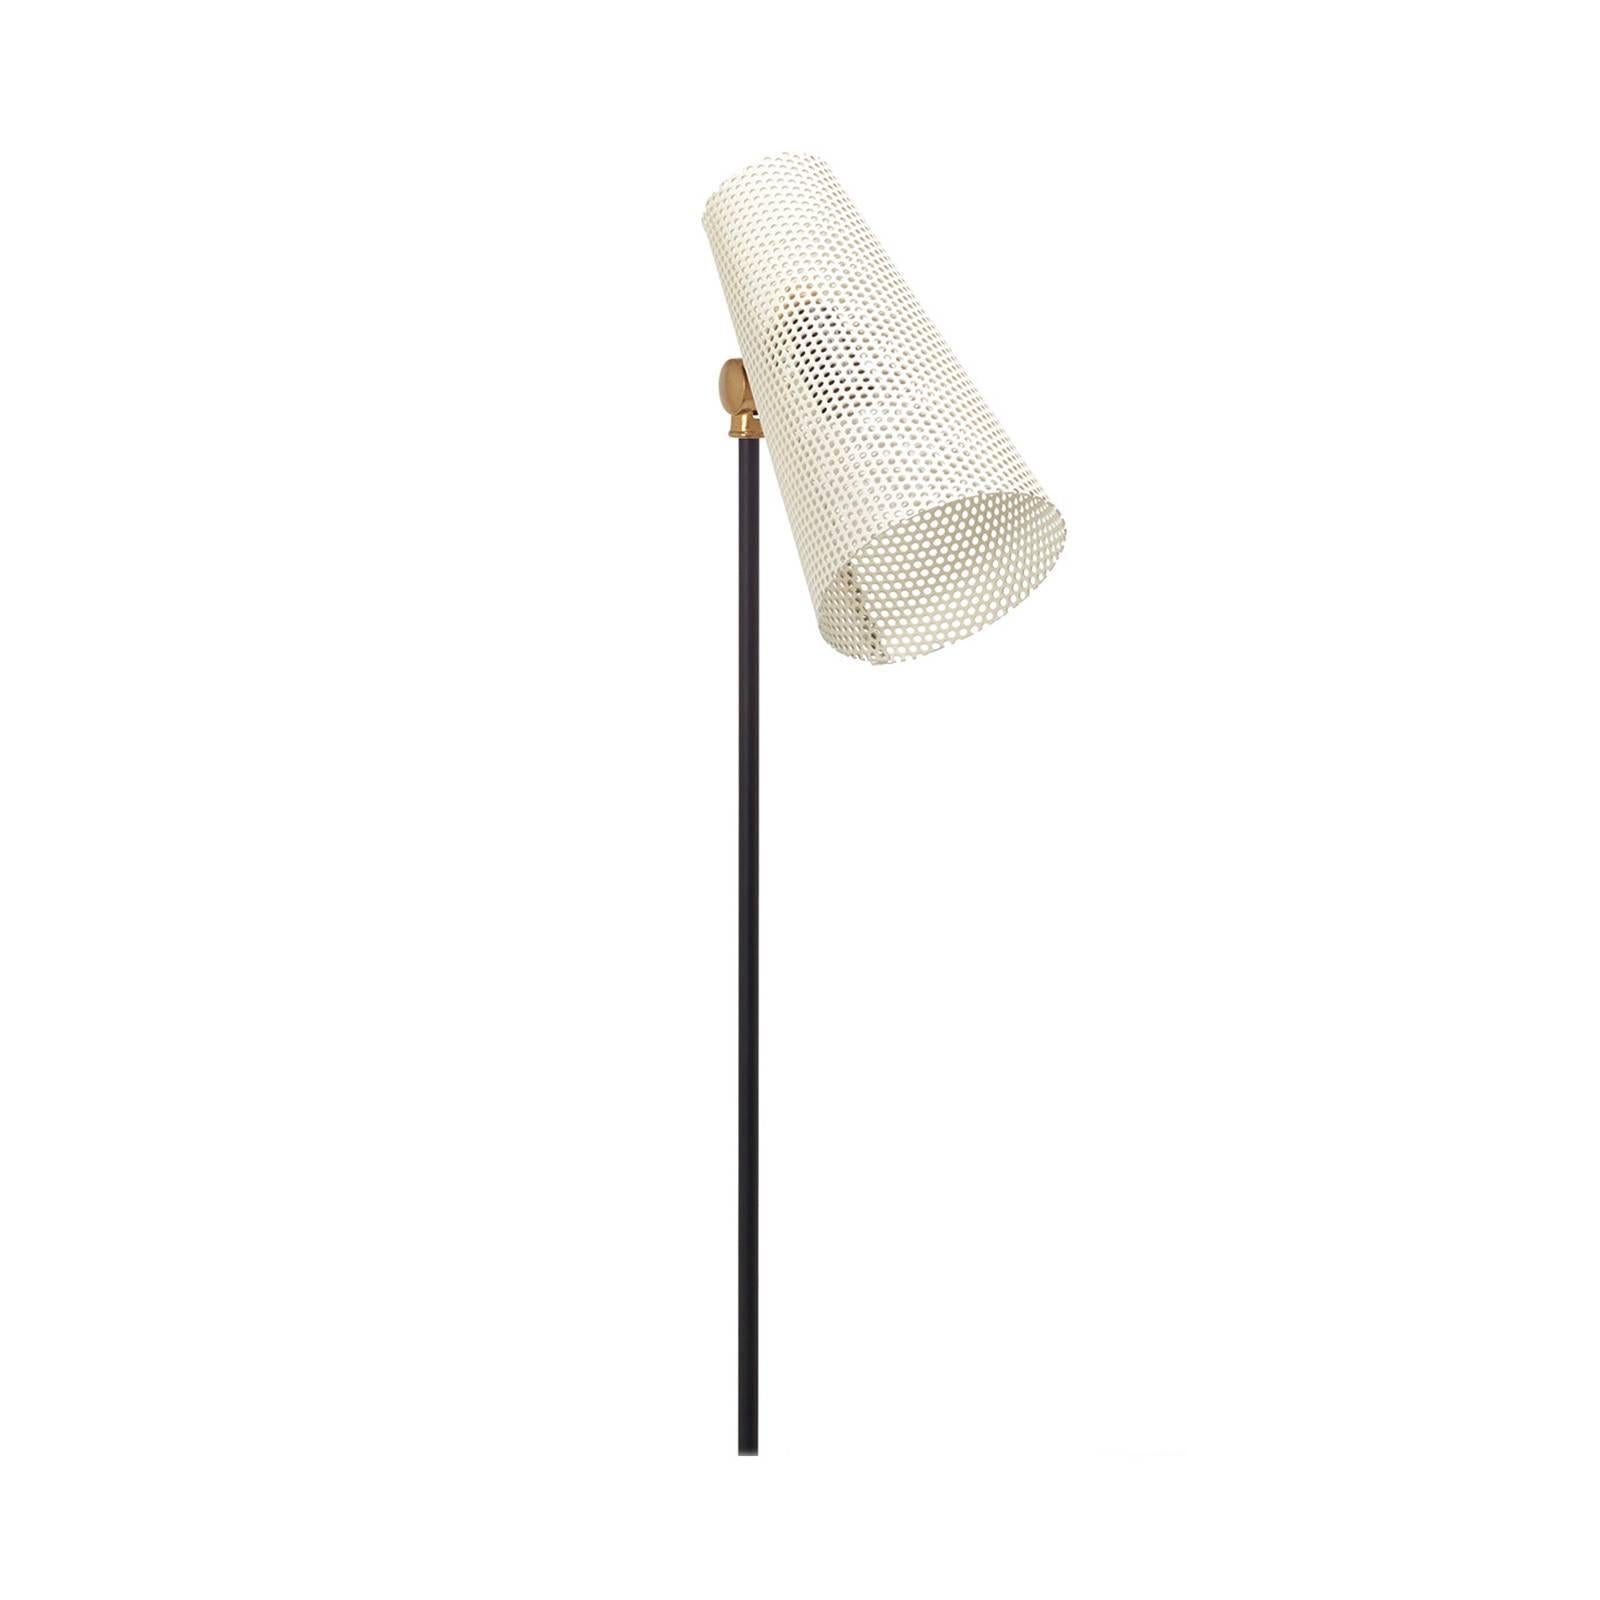 Inspired by Mid-Century design, this floor lamp casts a beautiful patterned light wherever it’s placed due to the perforated metal shade. Made by SABIN, a Los Angeles-based designer, this lamp comes in white with brass details.